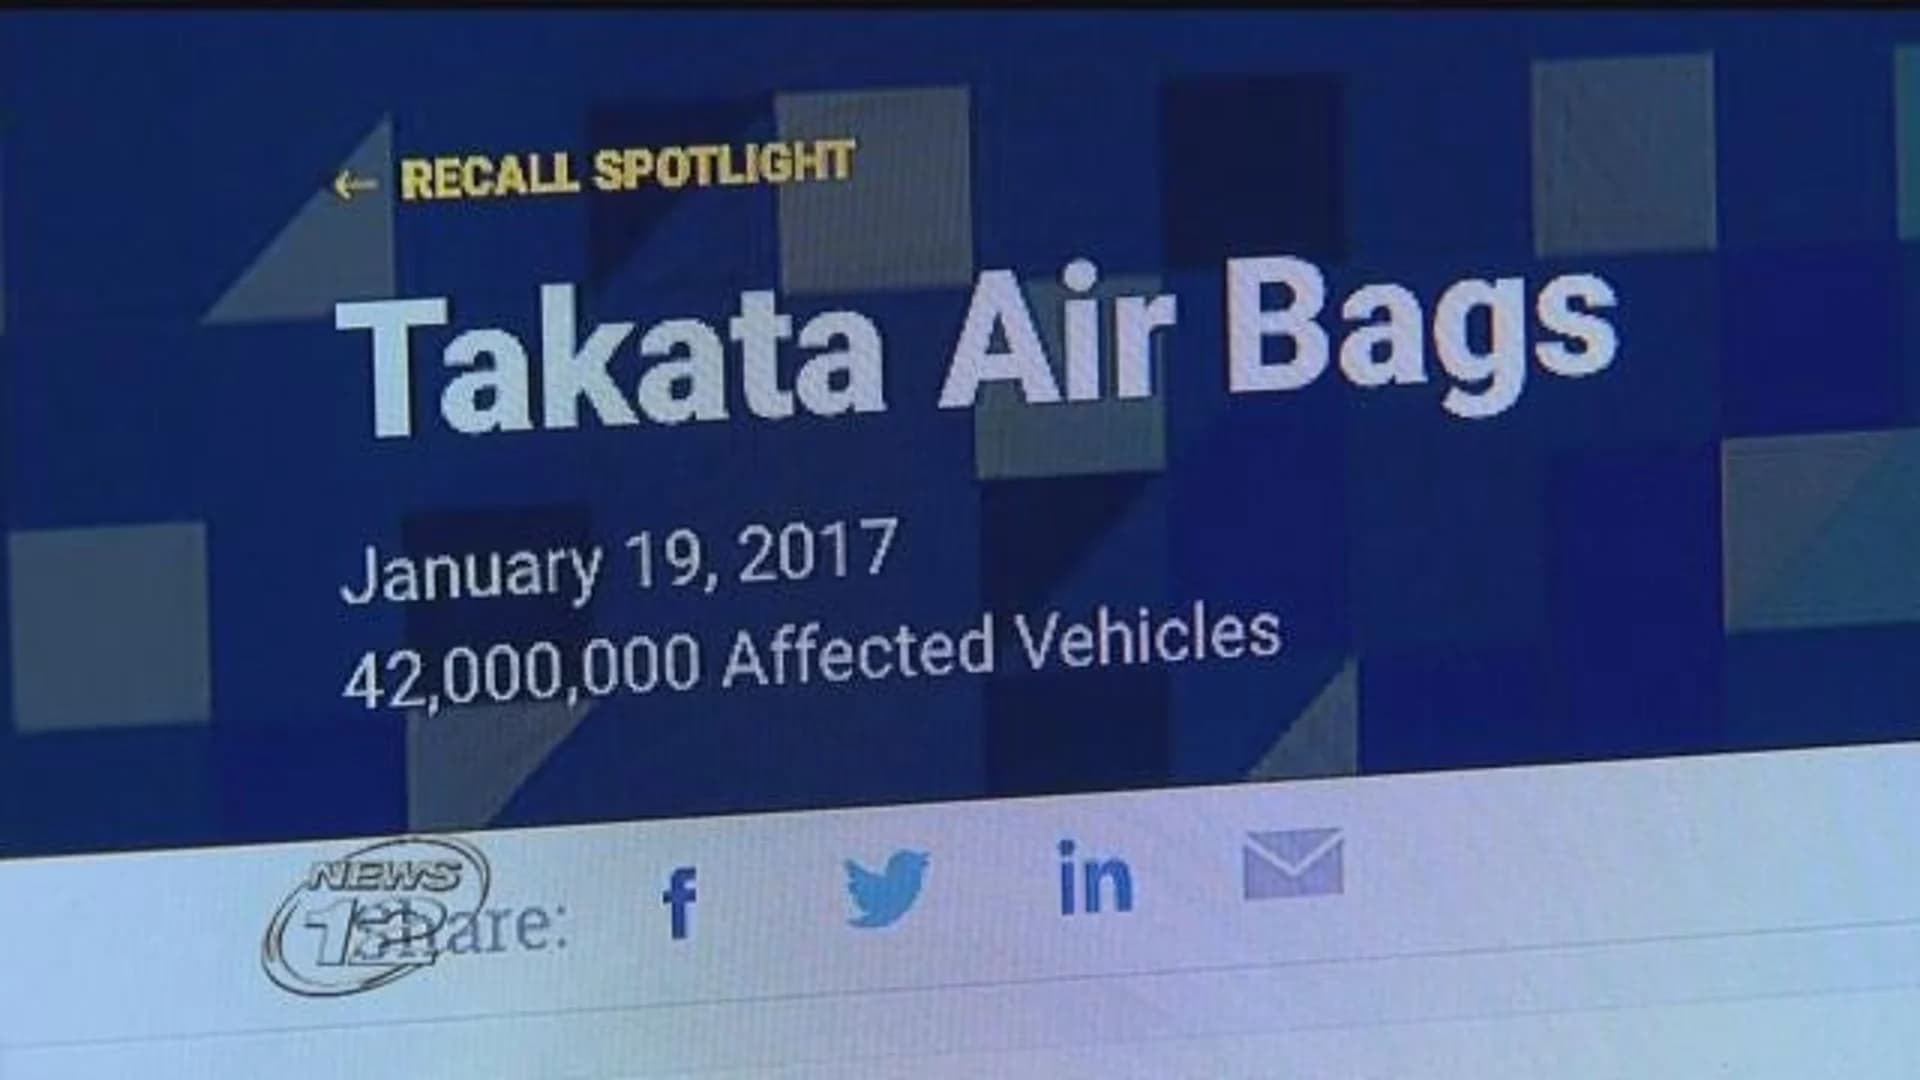 Consumer Alert: You may be driving with recycled airbags